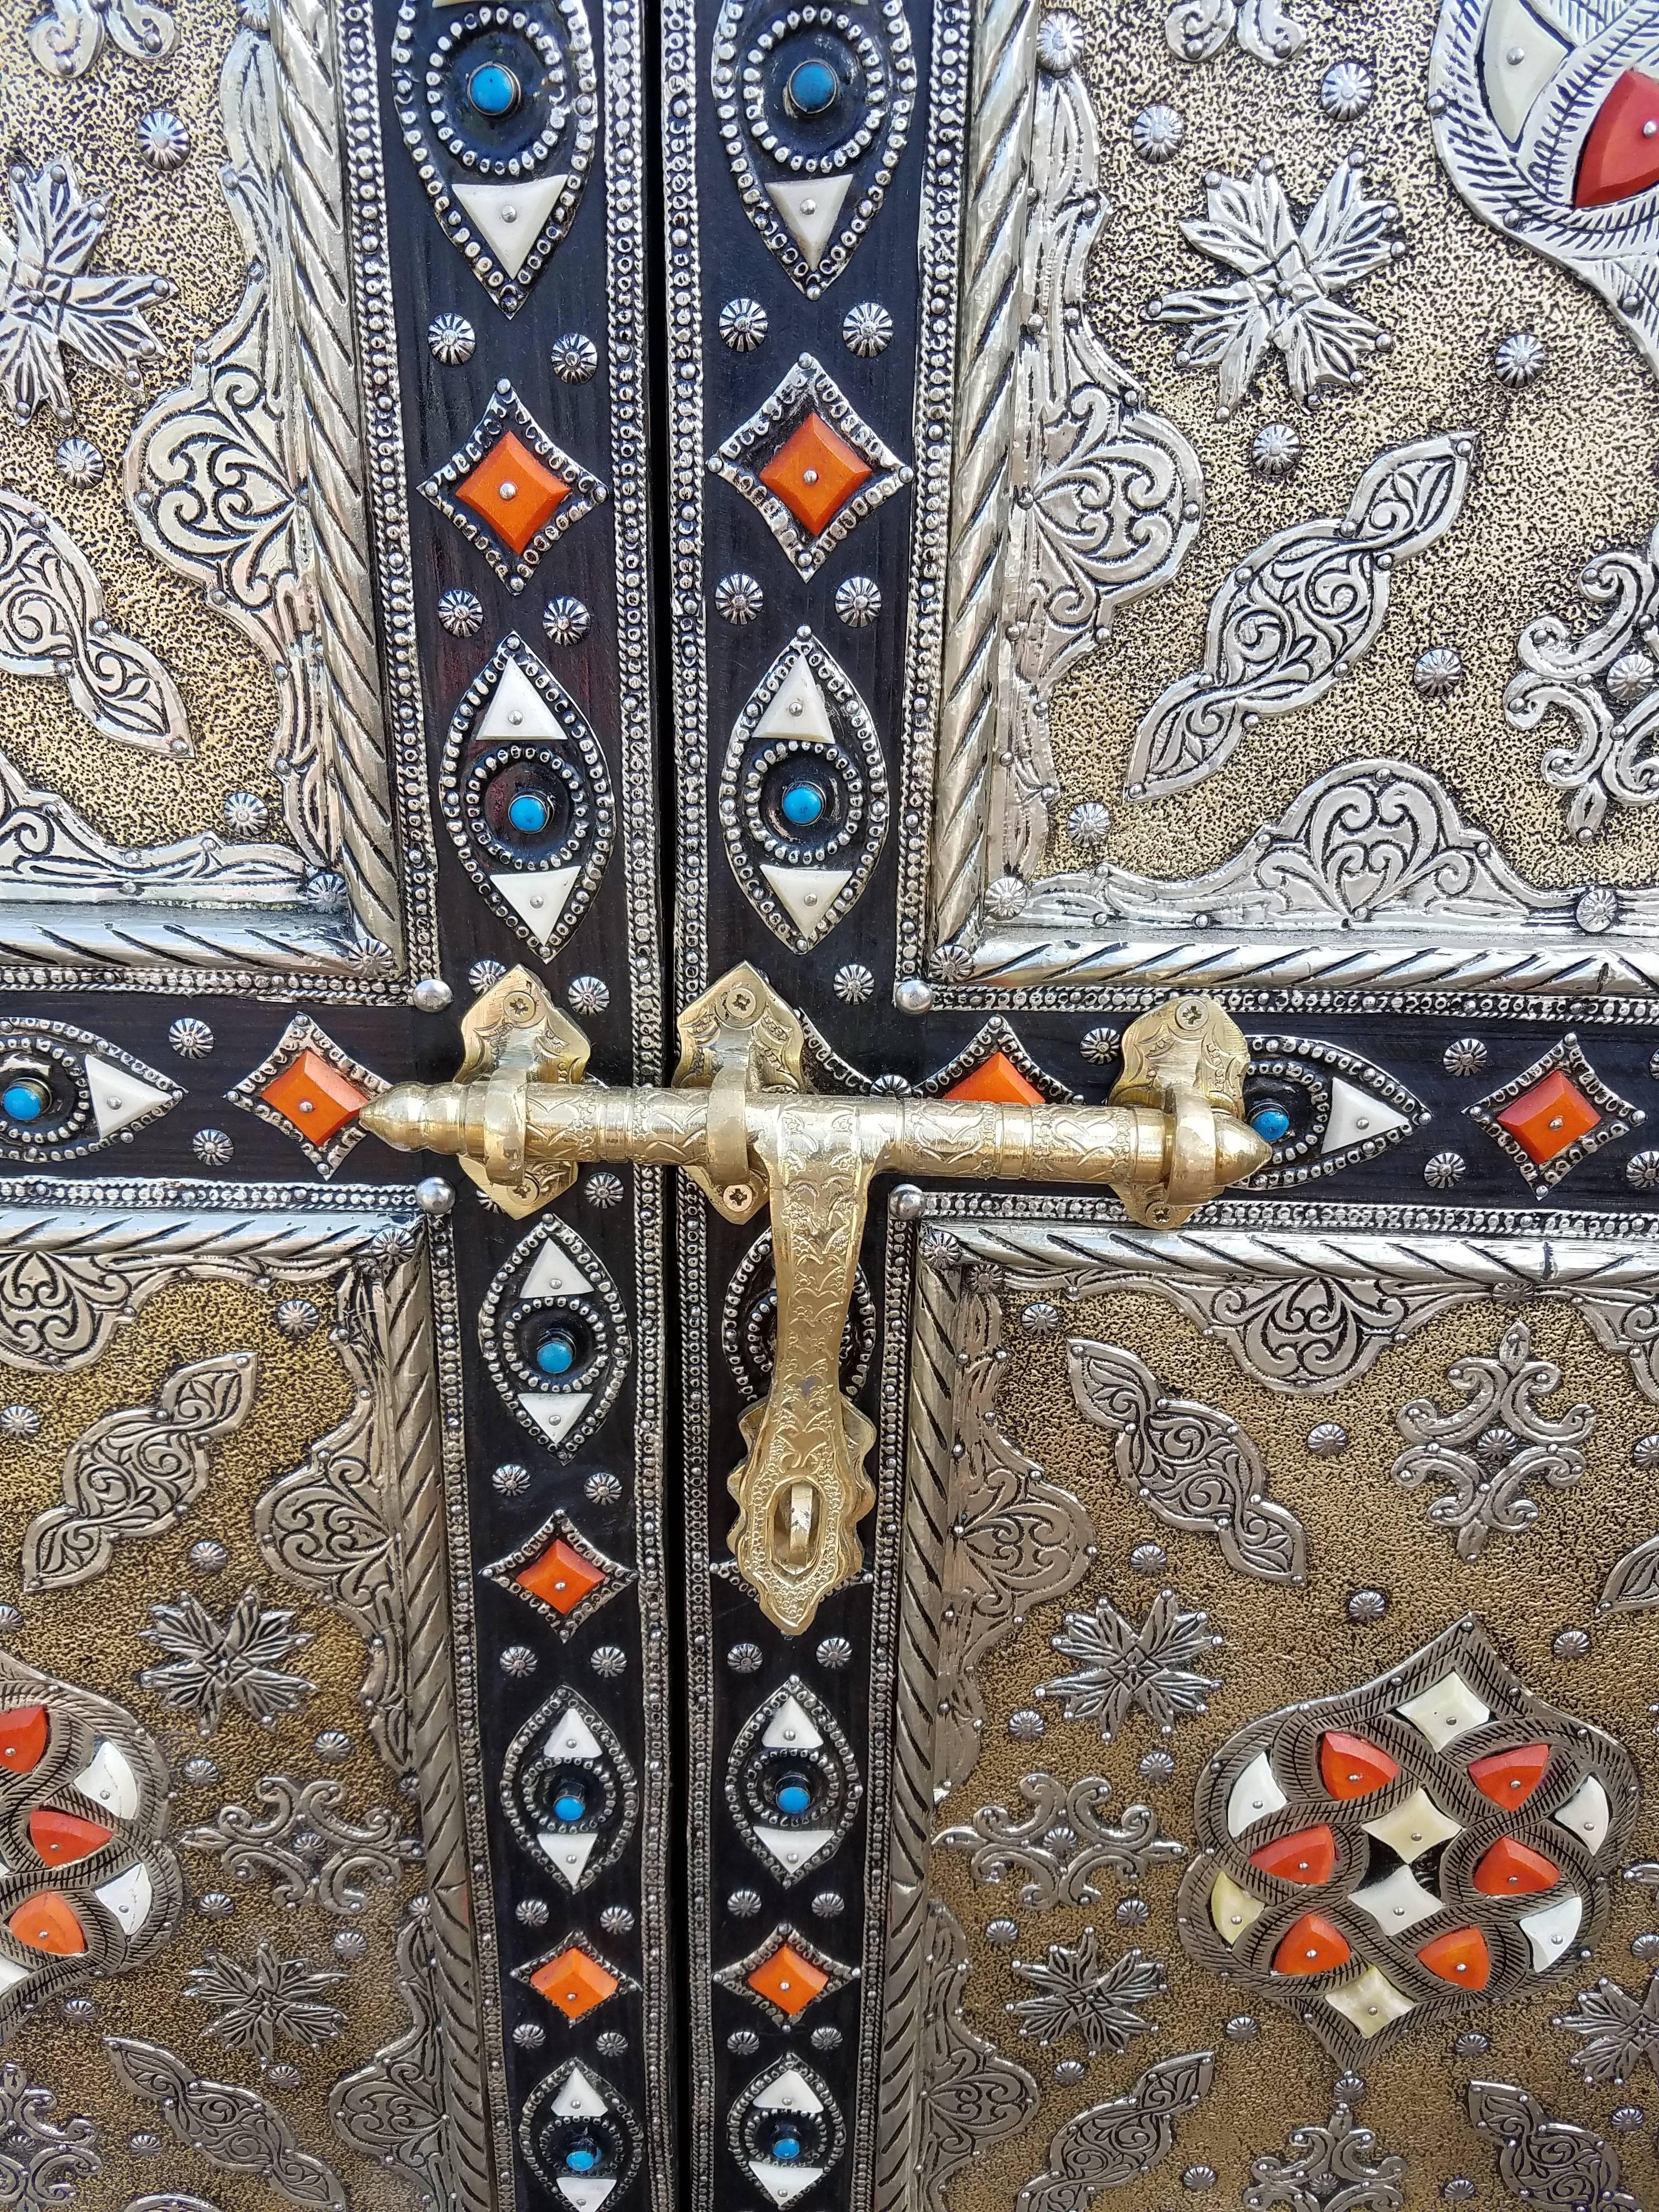 One of the most exquisite doors we've ever carried, this amazing handcrafted door is made in Morocco. It measures approximately 92” by 57